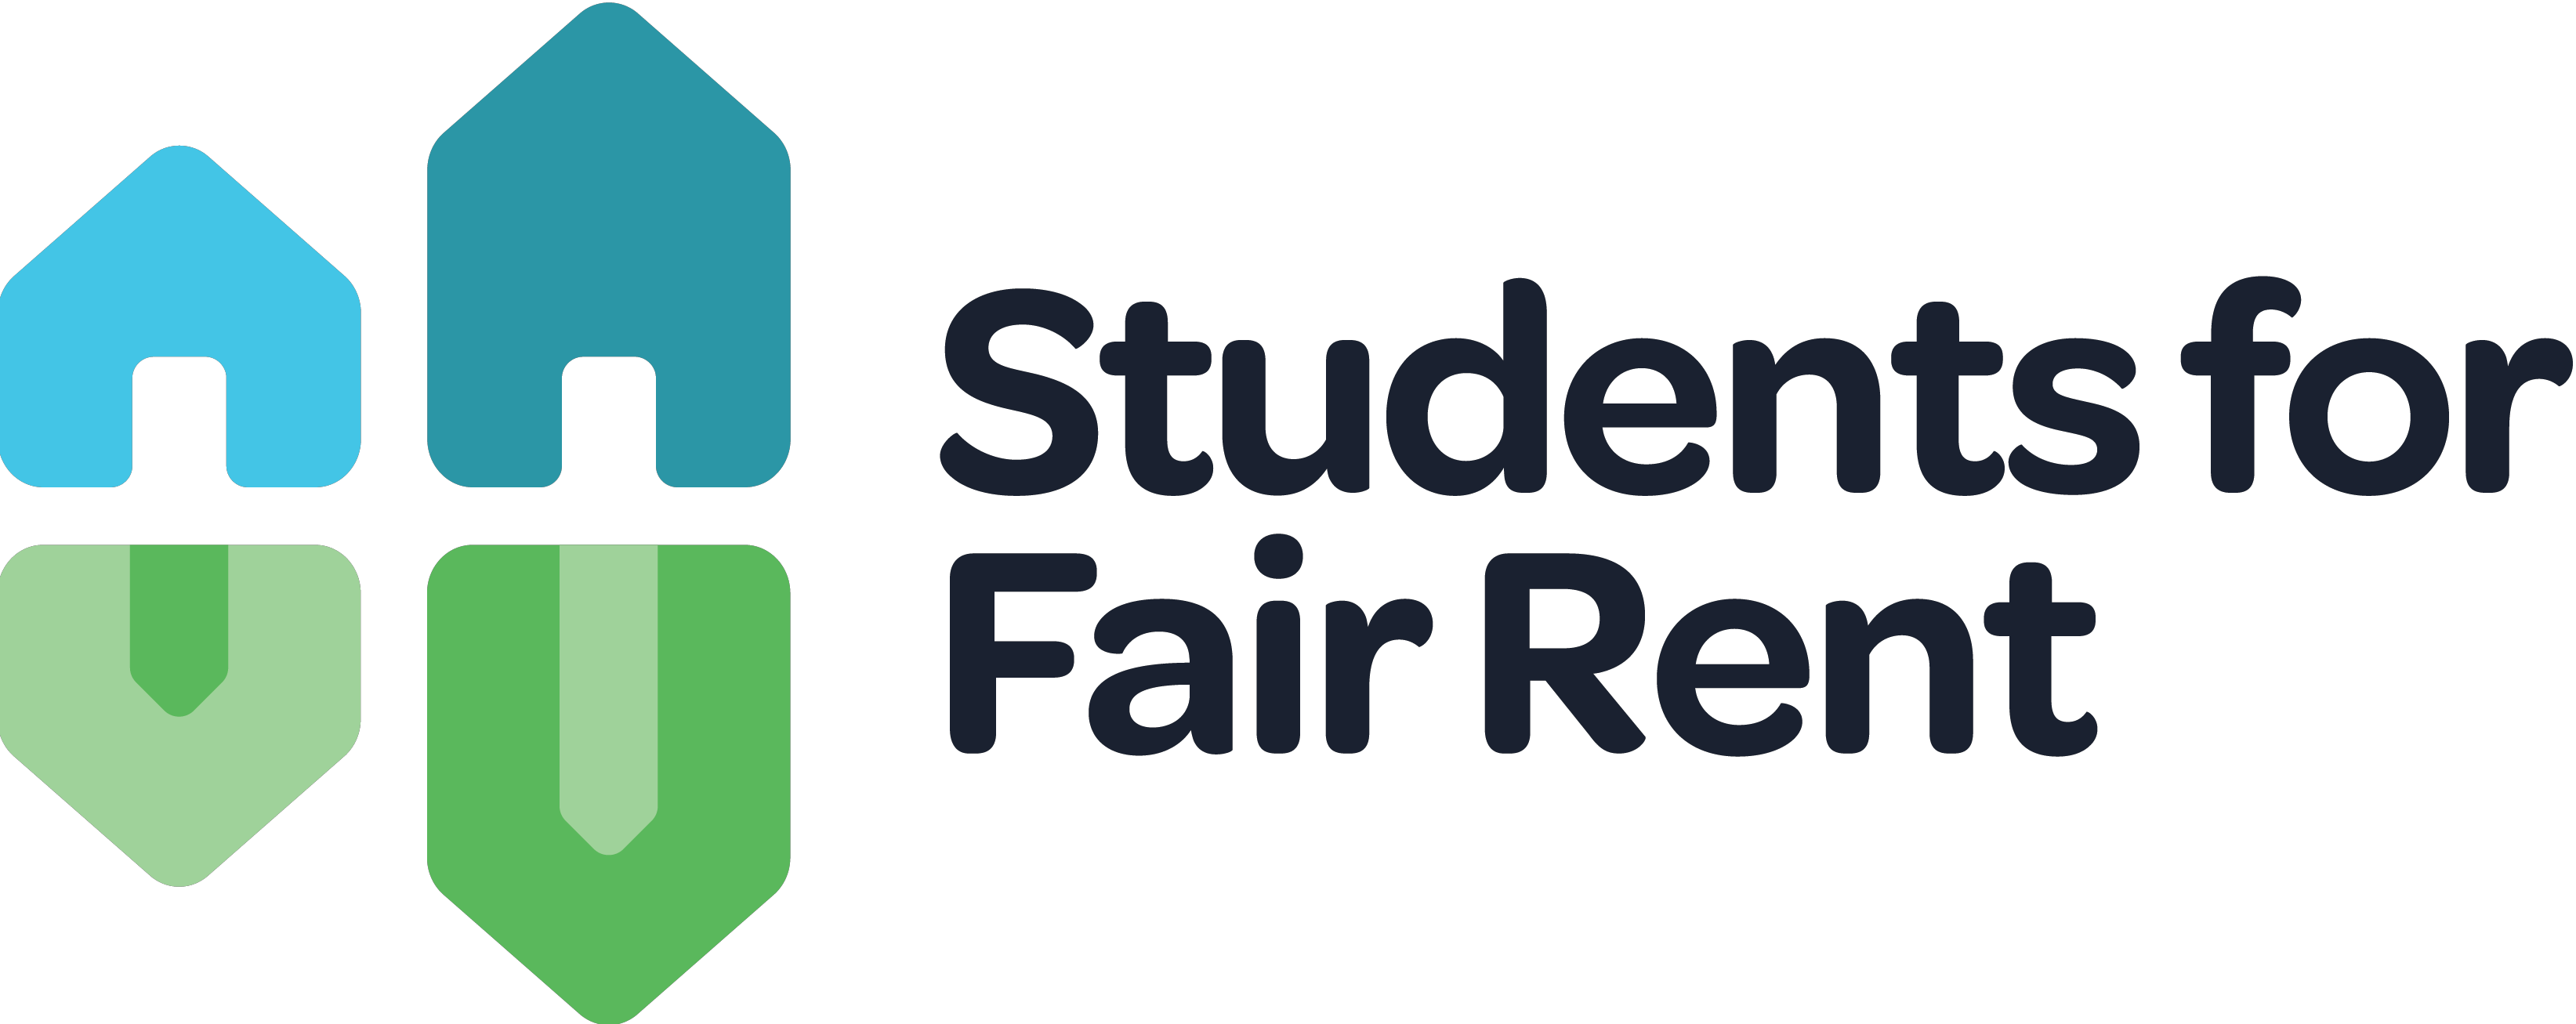 Students for Fair Rent Logo